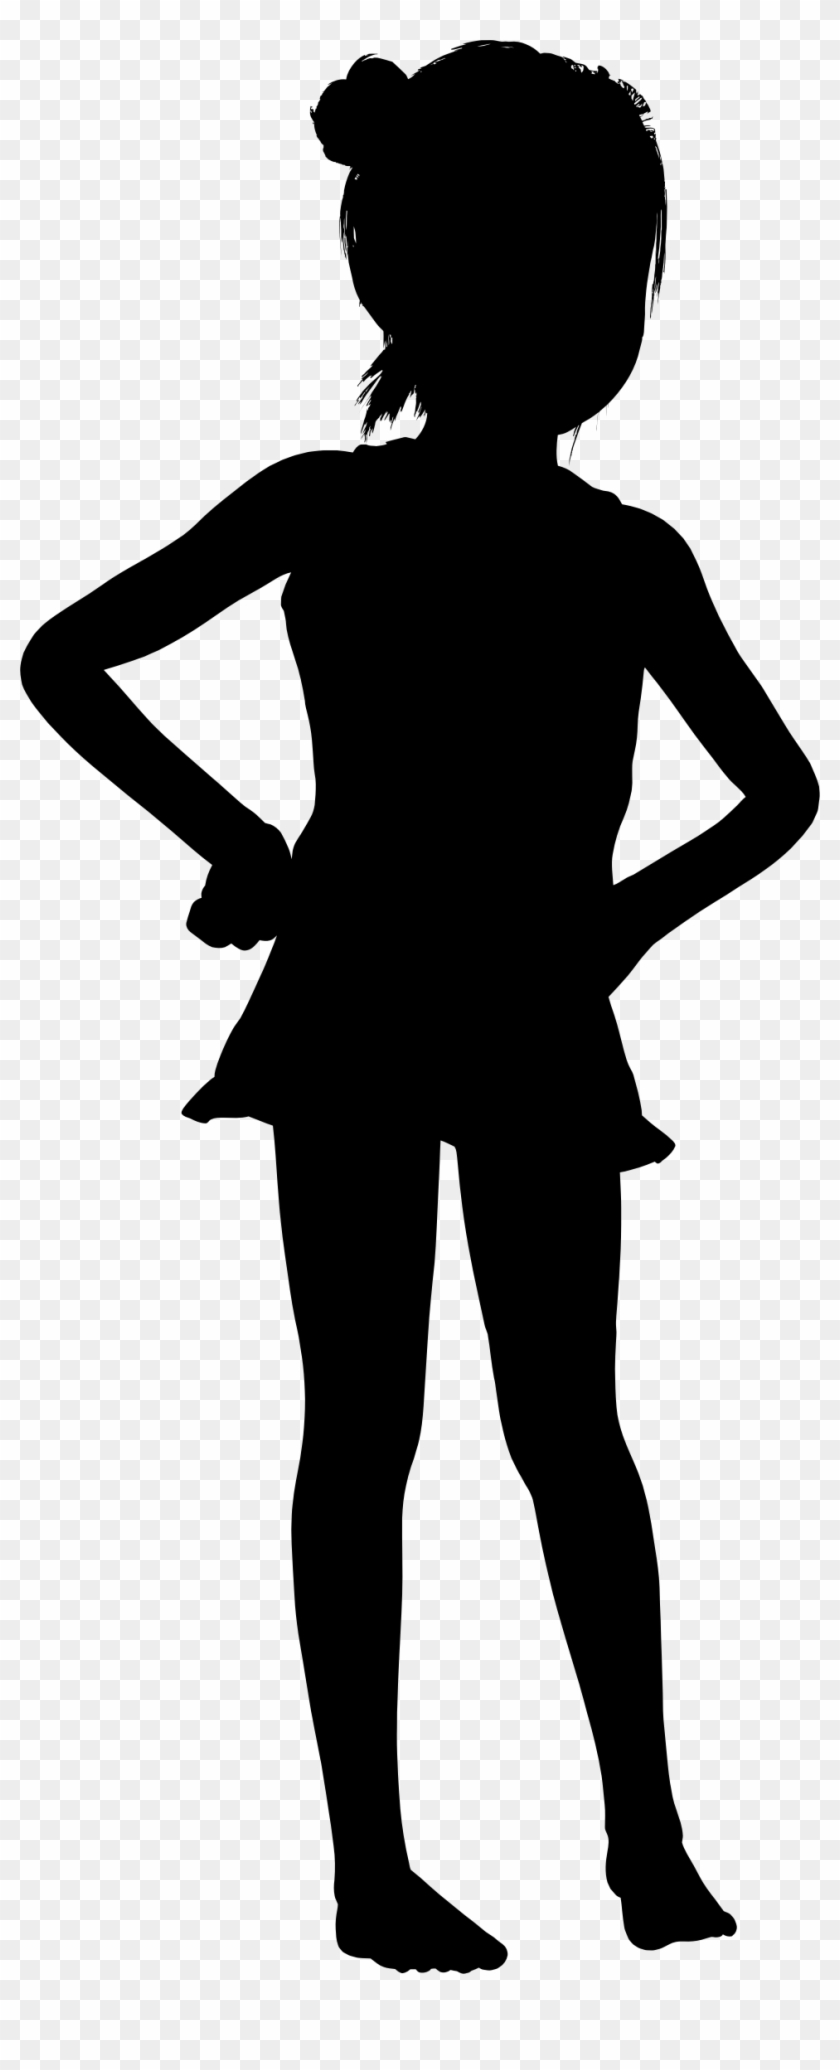 Big Image - Girl With Hands On Hips Silhouette #179198